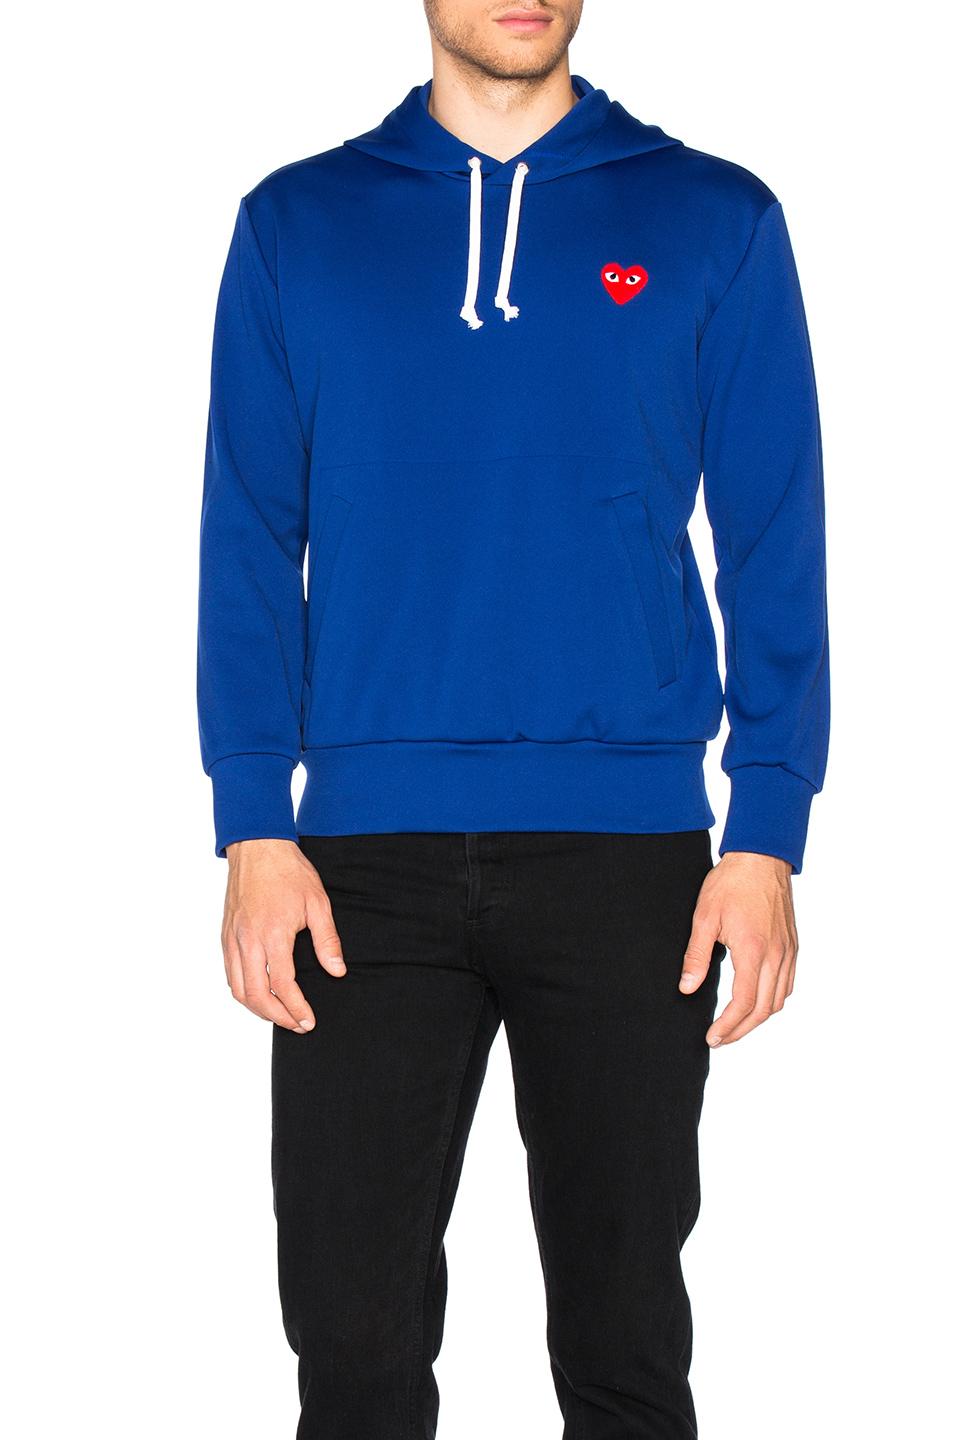 COMME DES GARÇONS PLAY Red Emblem Poly Hoodie in Navy (Blue) for Men - Lyst